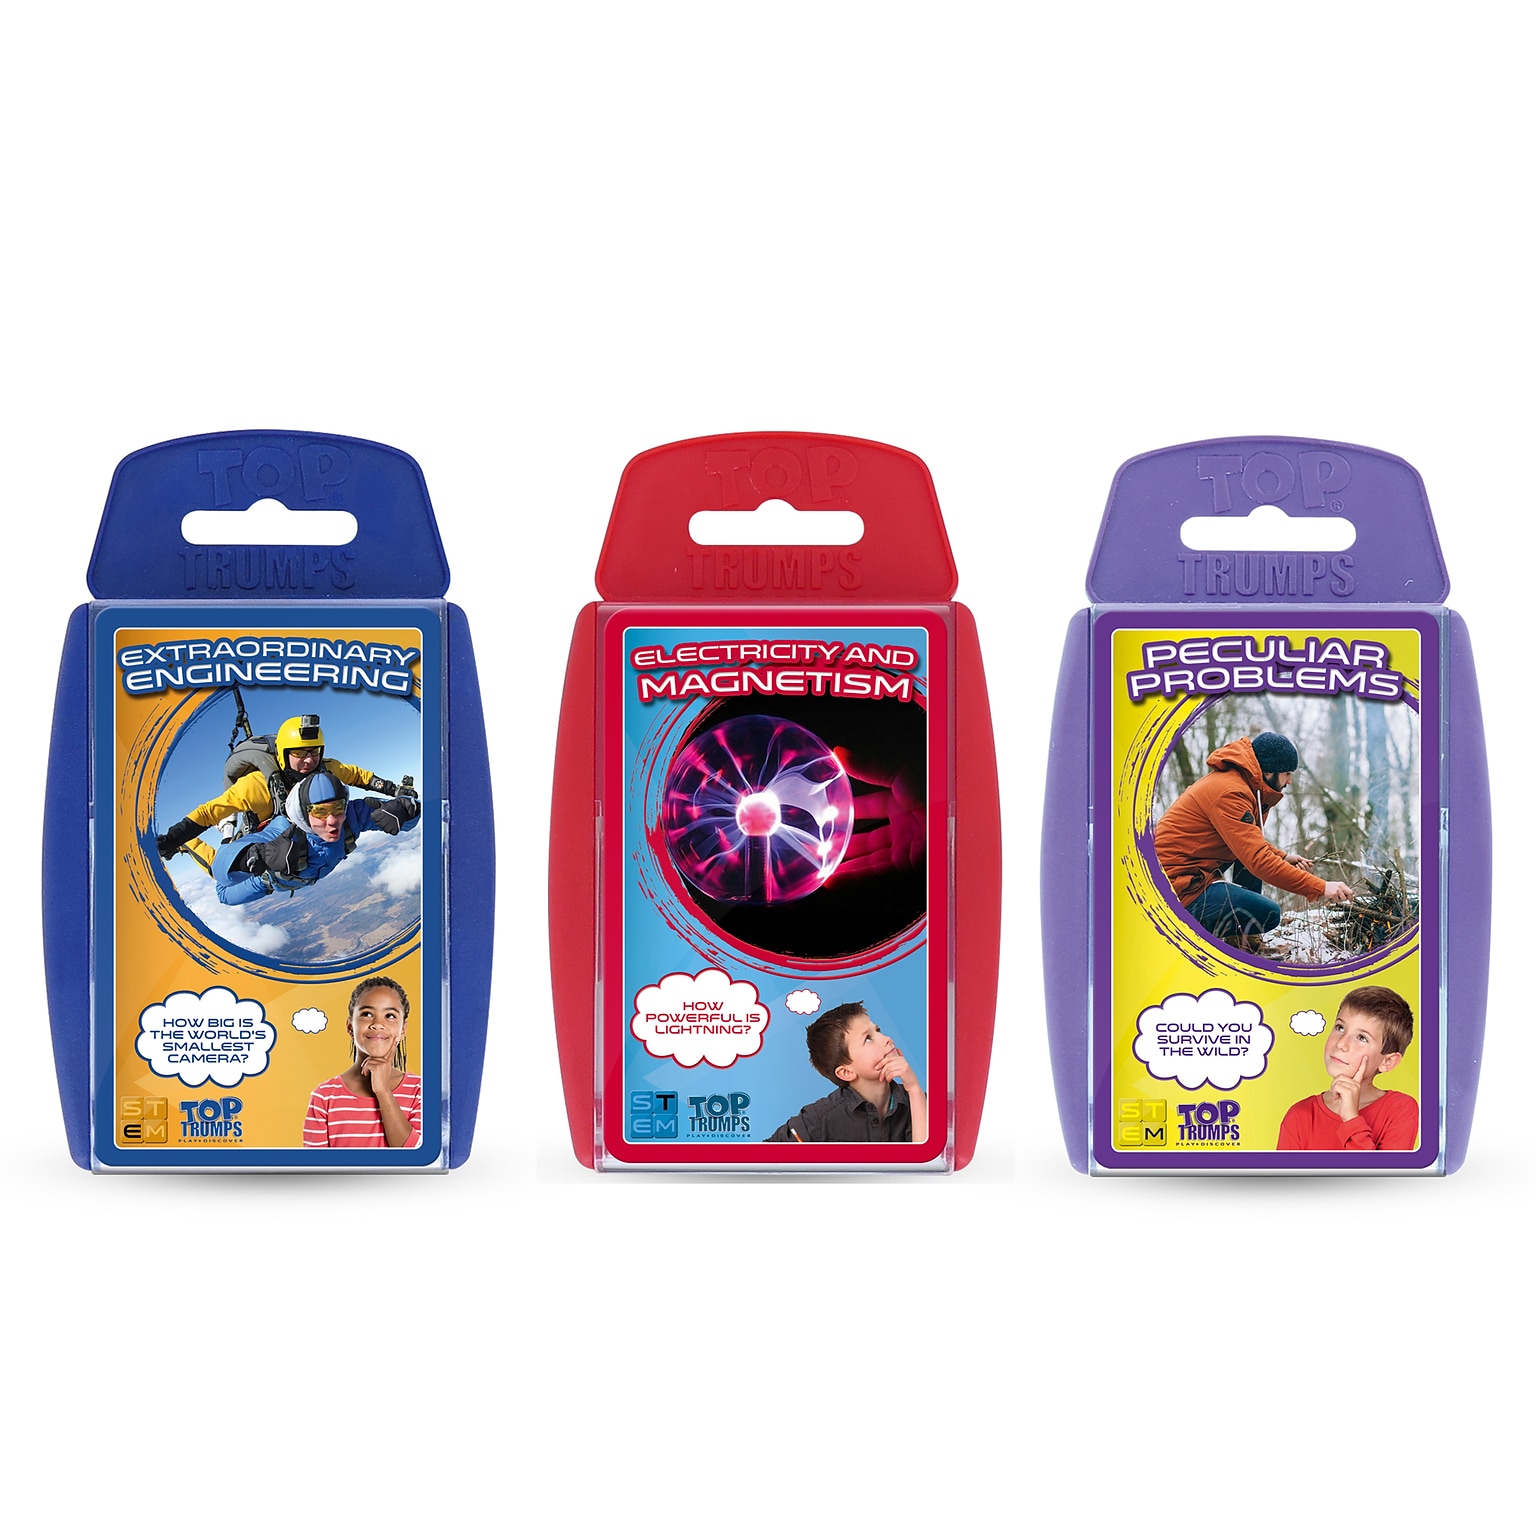 Top Trumps STEM Bundle 2: Engineering, Electricity & Magnetism, Peculiar Problems Card Games, Grade 3+ (TPUWM00777)